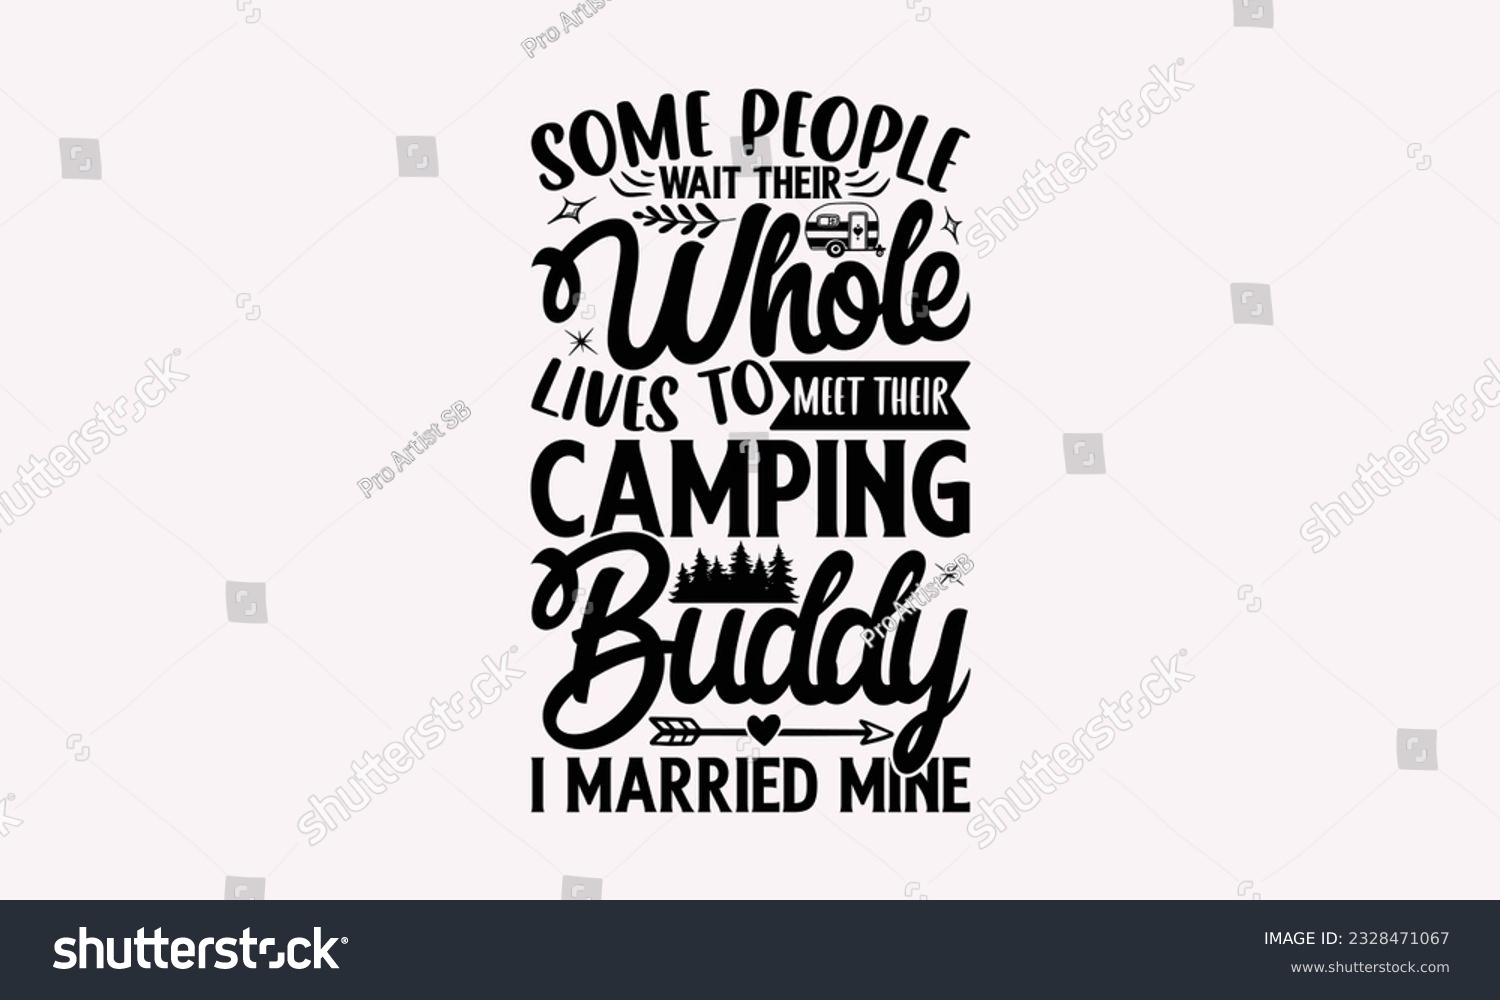 SVG of Some people wait their whole lives to meet their camping buddy I married mine - Camping SVG Design, Print on T-Shirts, Mugs, Birthday Cards, Wall Decals, Stickers, Birthday Party Decorations, Cuts and svg